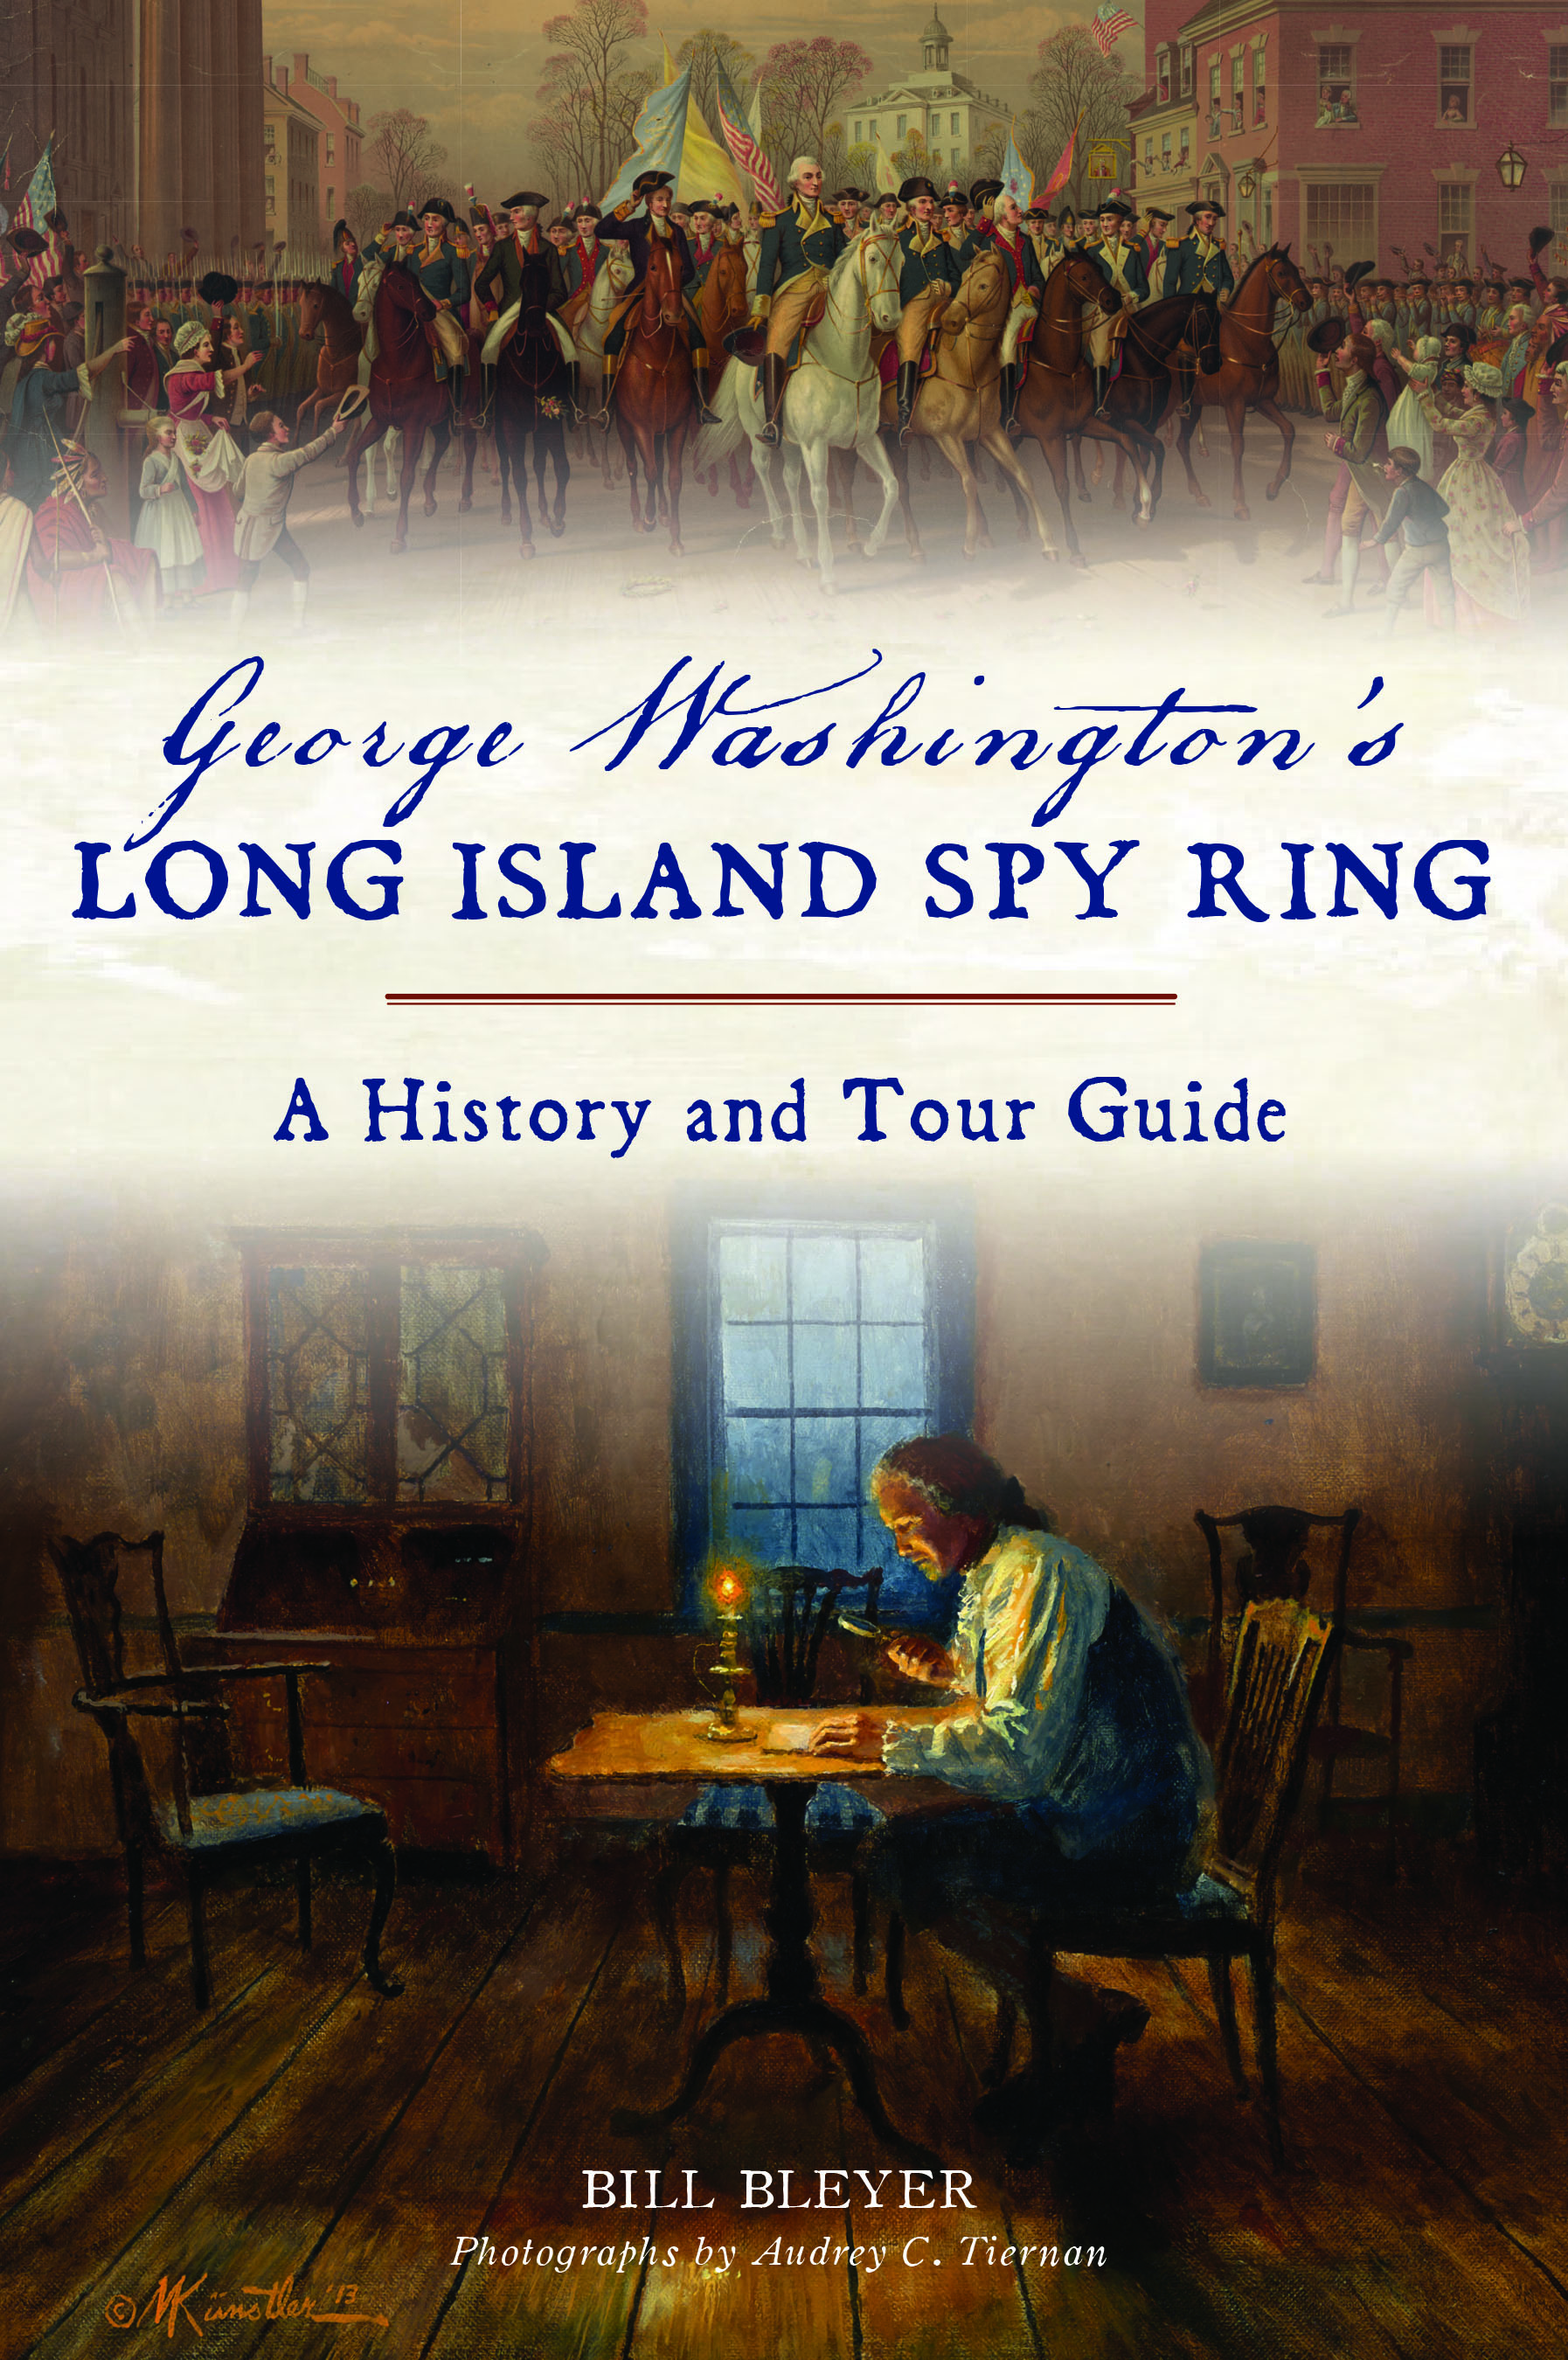 An image of the cover the of the book, George Washington's Long Island Spy Ring by Bill Bleyer.